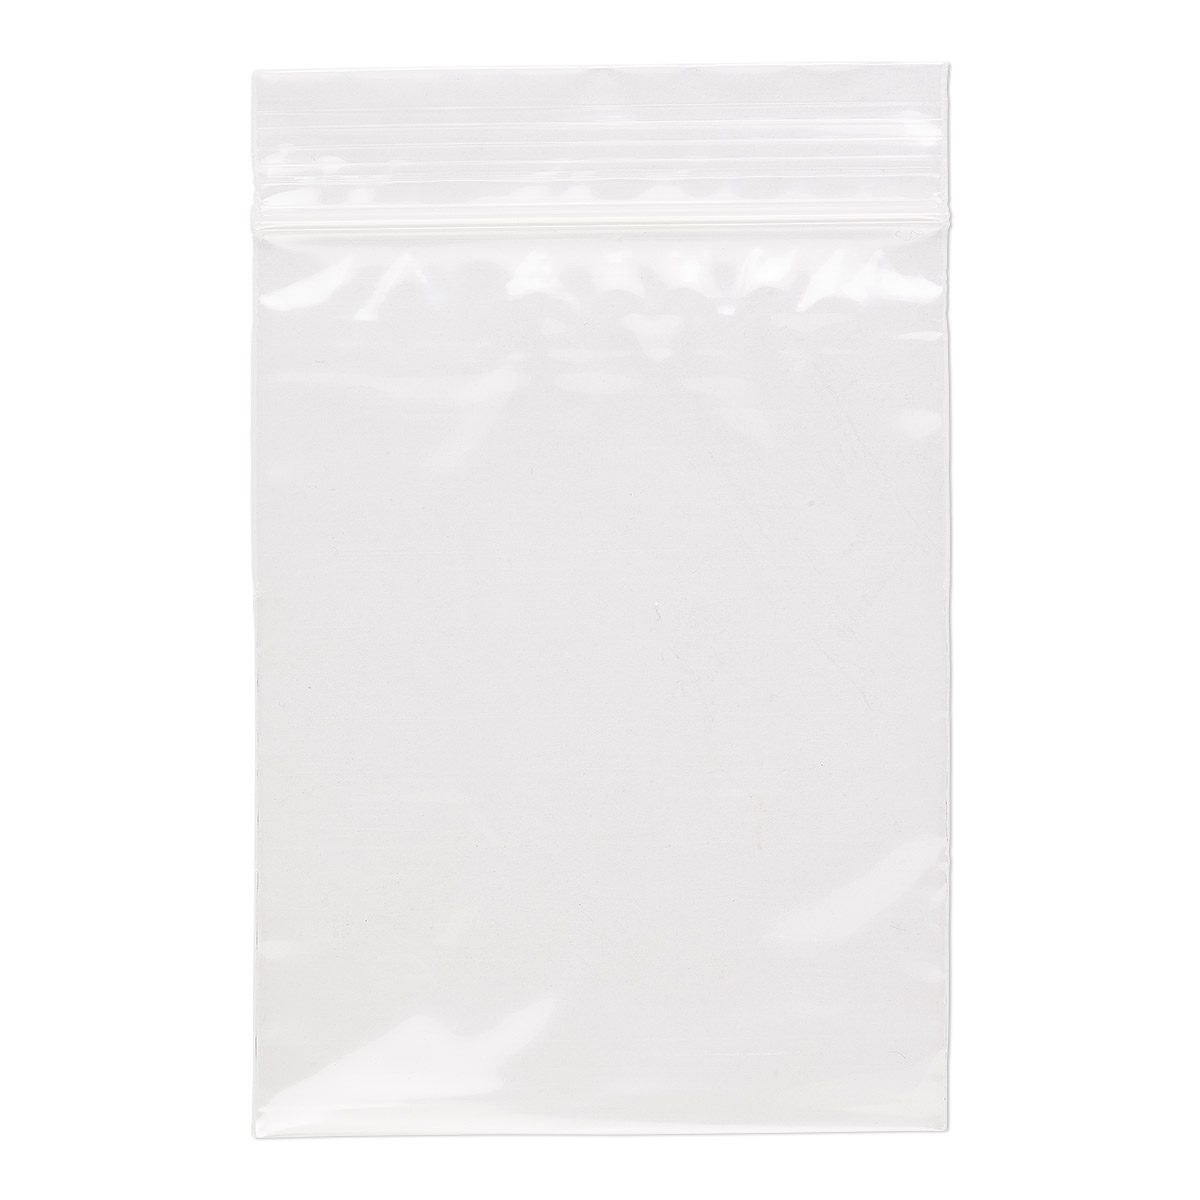 Bag, Tite-Lip™, oxo-biodegradable plastic, clear, 3x4-inch top zip ...